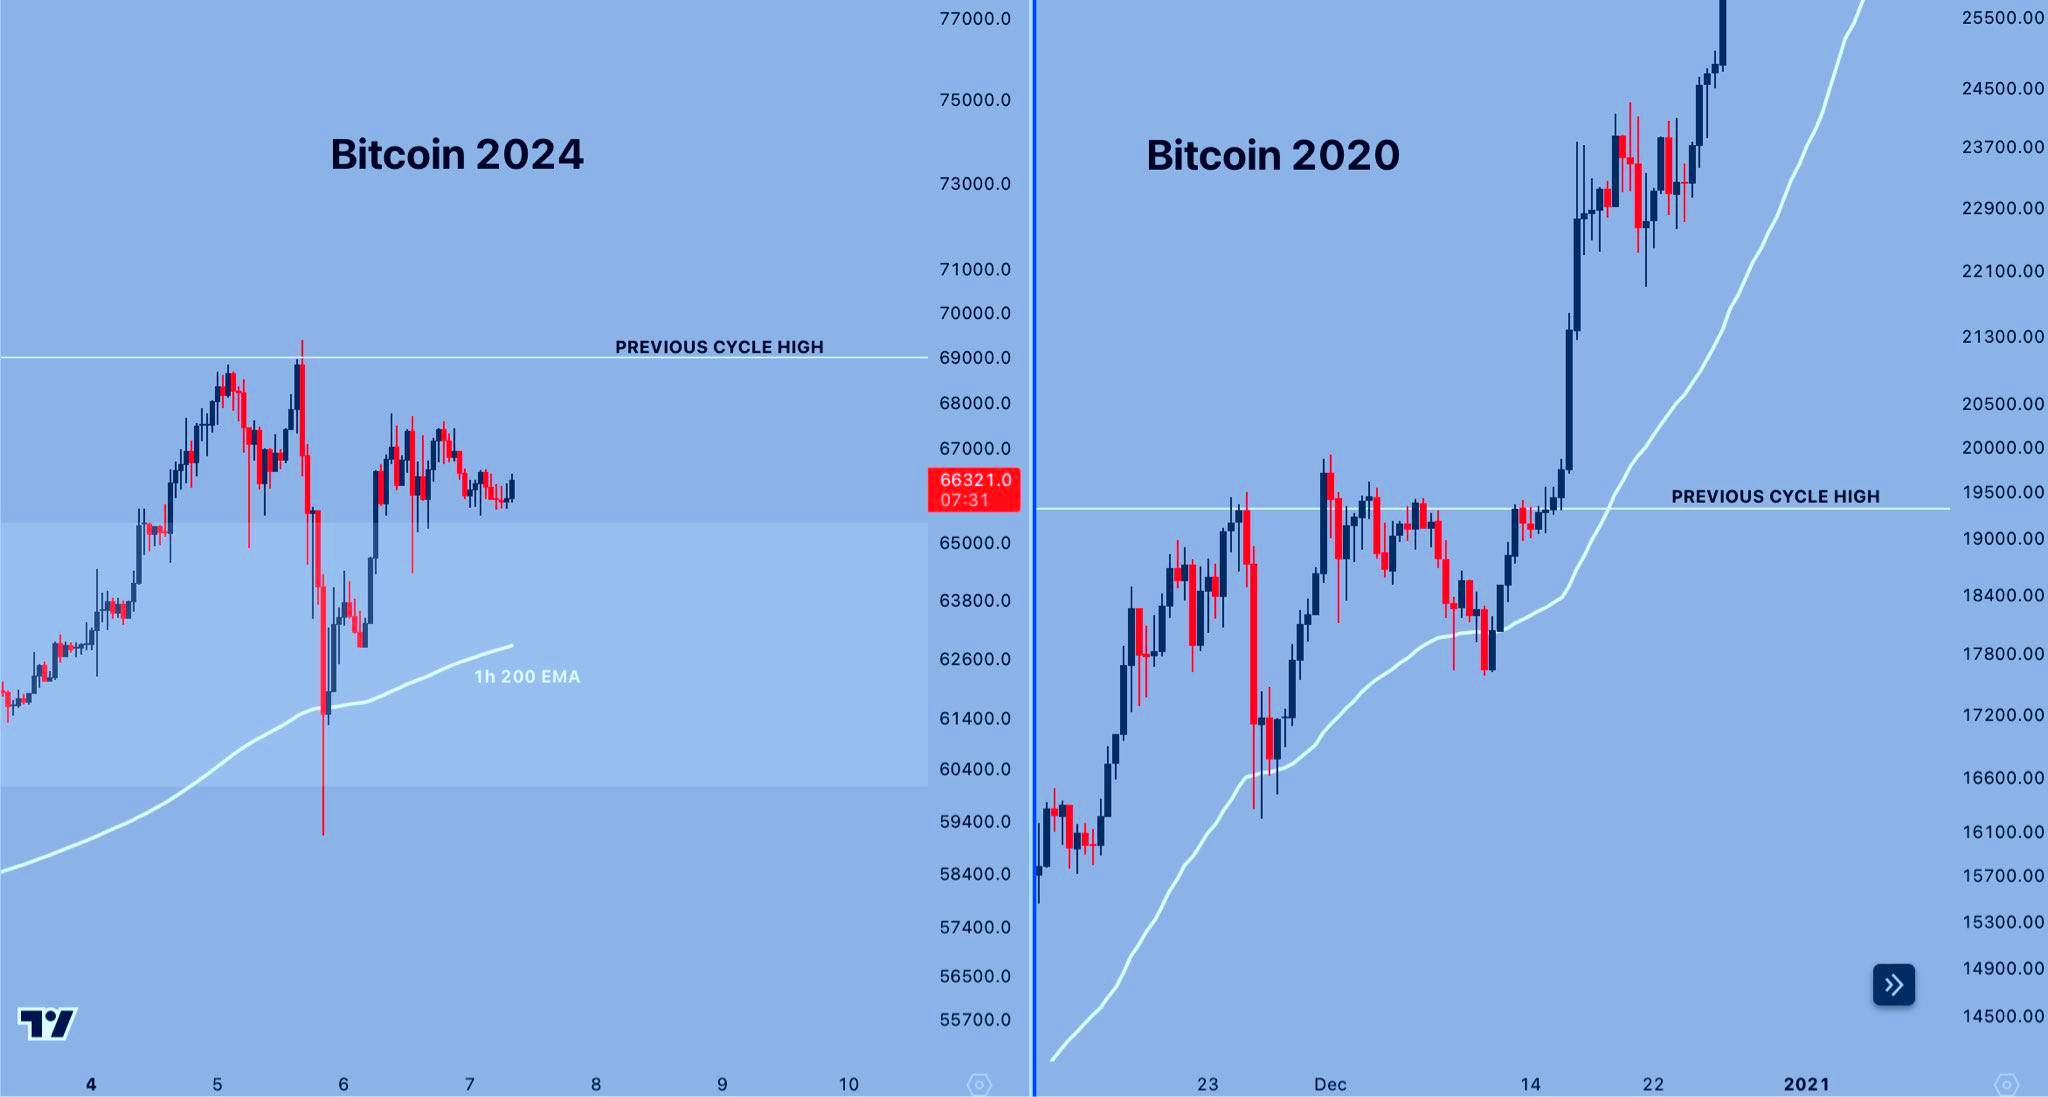 Bitcoin price consolidation comparison between 2024 and 2020